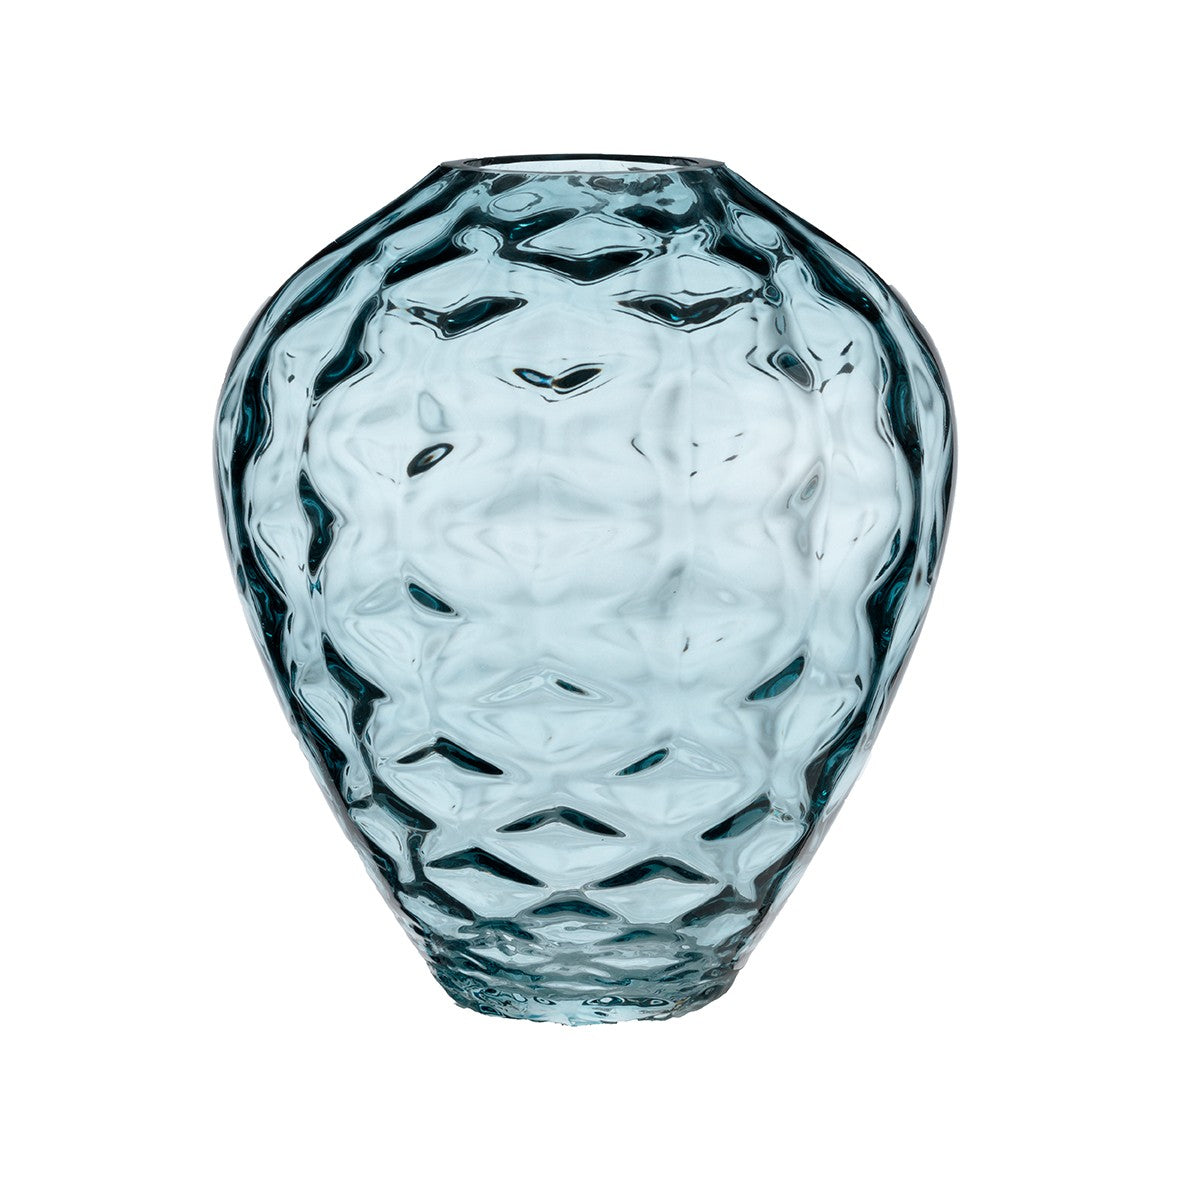 Lucas + McKearn Bowl from the Samara collection in Blue finish